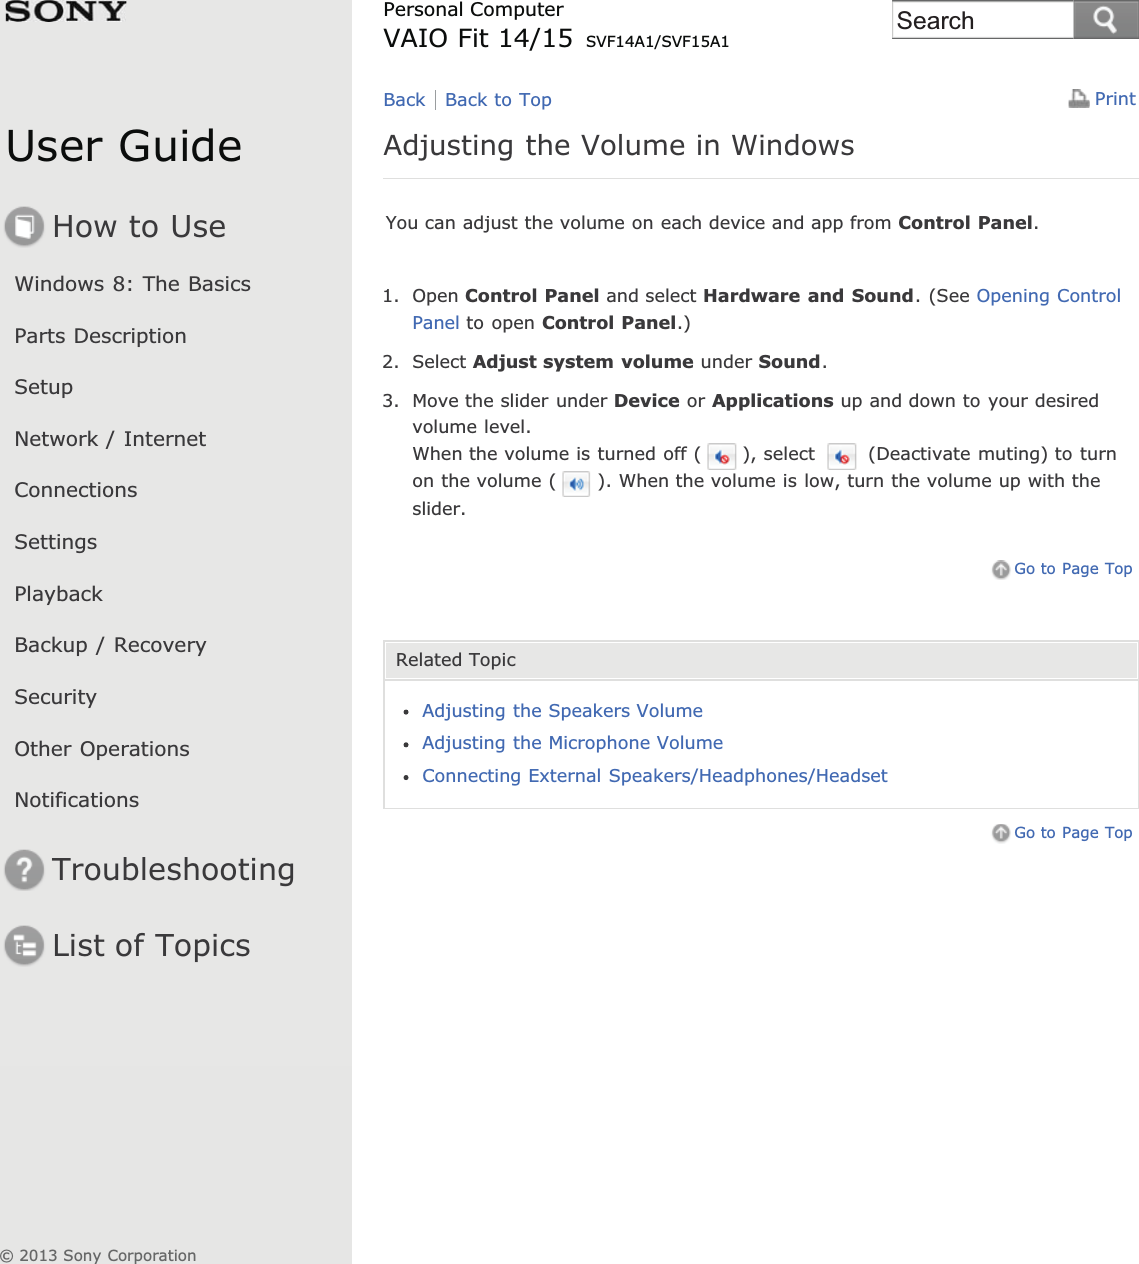 User GuideHow to UseWindows 8: The BasicsParts DescriptionSetupNetwork / InternetConnectionsSettingsPlaybackBackup / RecoverySecurityOther OperationsNotificationsTroubleshootingList of TopicsPrintPersonal ComputerVAIO Fit 14/15 SVF14A1/SVF15A1Adjusting the Volume in WindowsYou can adjust the volume on each device and app from Control Panel.1. Open Control Panel and select Hardware and Sound. (See Opening ControlPanel to open Control Panel.)2. Select Adjust system volume under Sound.3. Move the slider under Device or Applications up and down to your desiredvolume level.When the volume is turned off ( ), select   (Deactivate muting) to turnon the volume ( ). When the volume is low, turn the volume up with theslider.Go to Page TopRelated TopicAdjusting the Speakers VolumeAdjusting the Microphone VolumeConnecting External Speakers/Headphones/HeadsetGo to Page TopBack Back to Top© 2013 Sony CorporationSearch